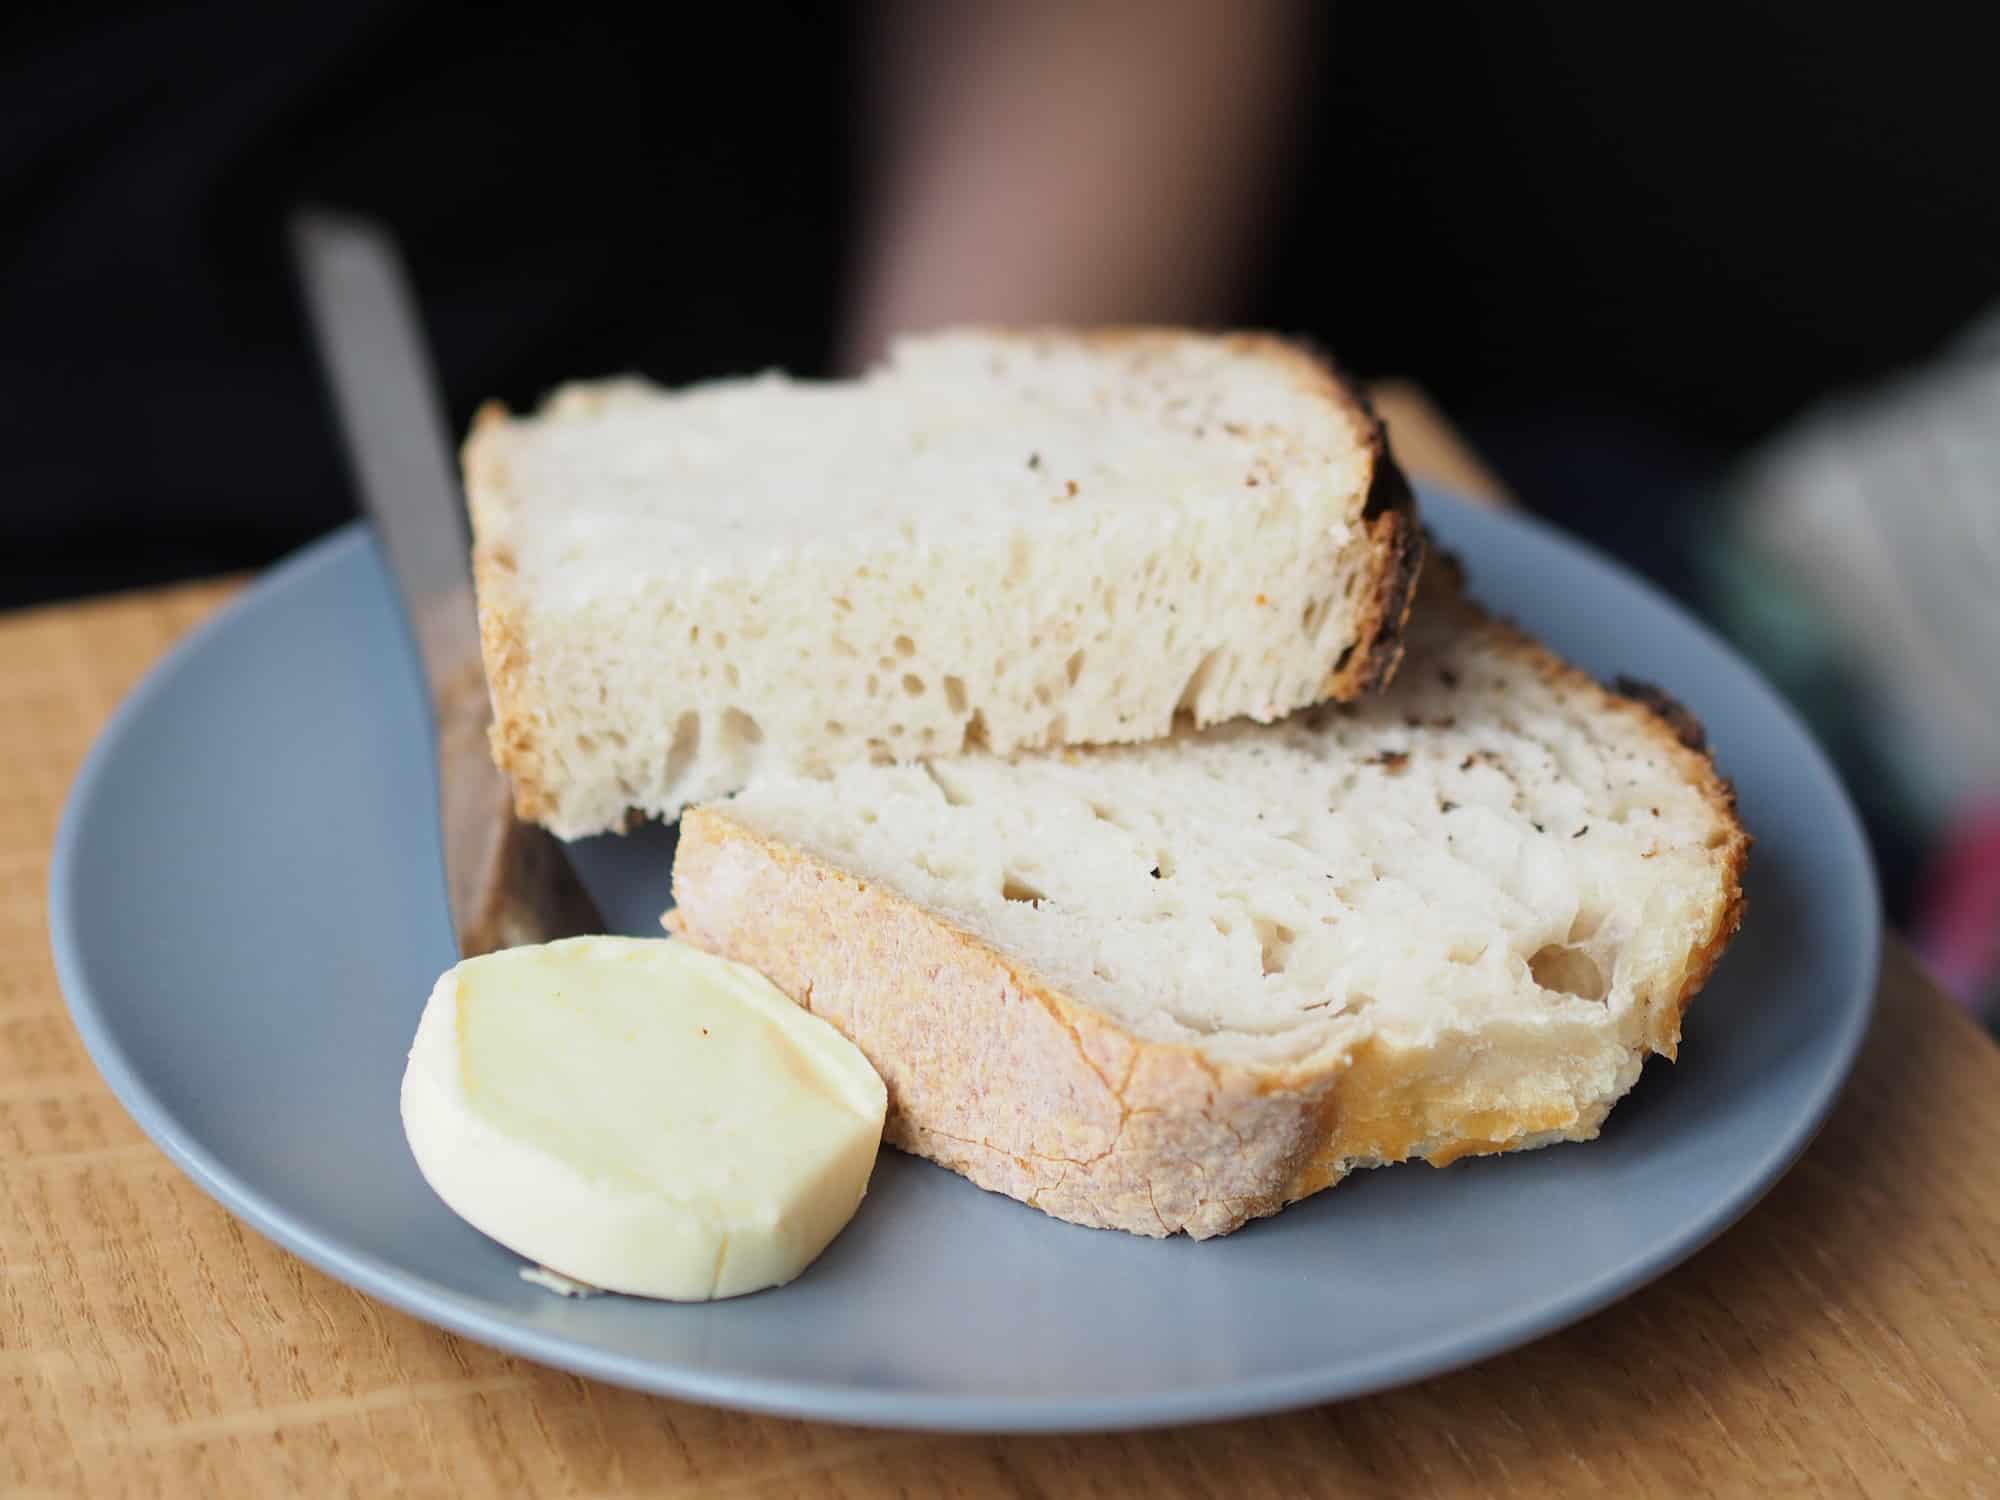 Why does French butter taste so good? Because it's made by hand, and eaten with a loaf of artisanal bread like on this blue plate on a wooden table.